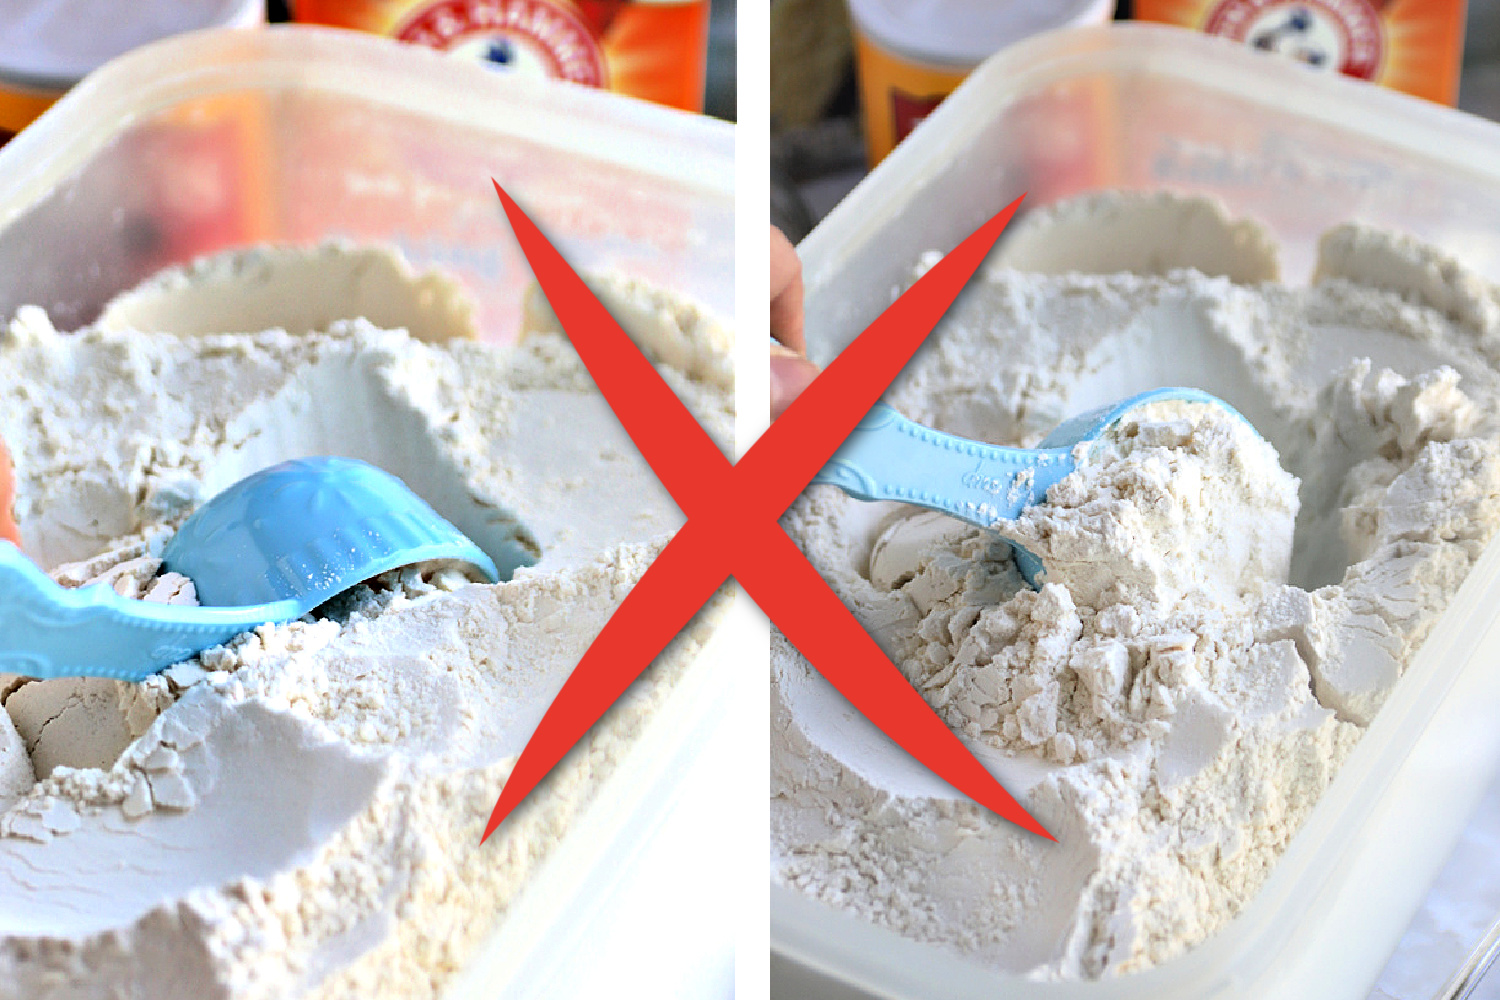  How to measure flour correctly for better baking success.